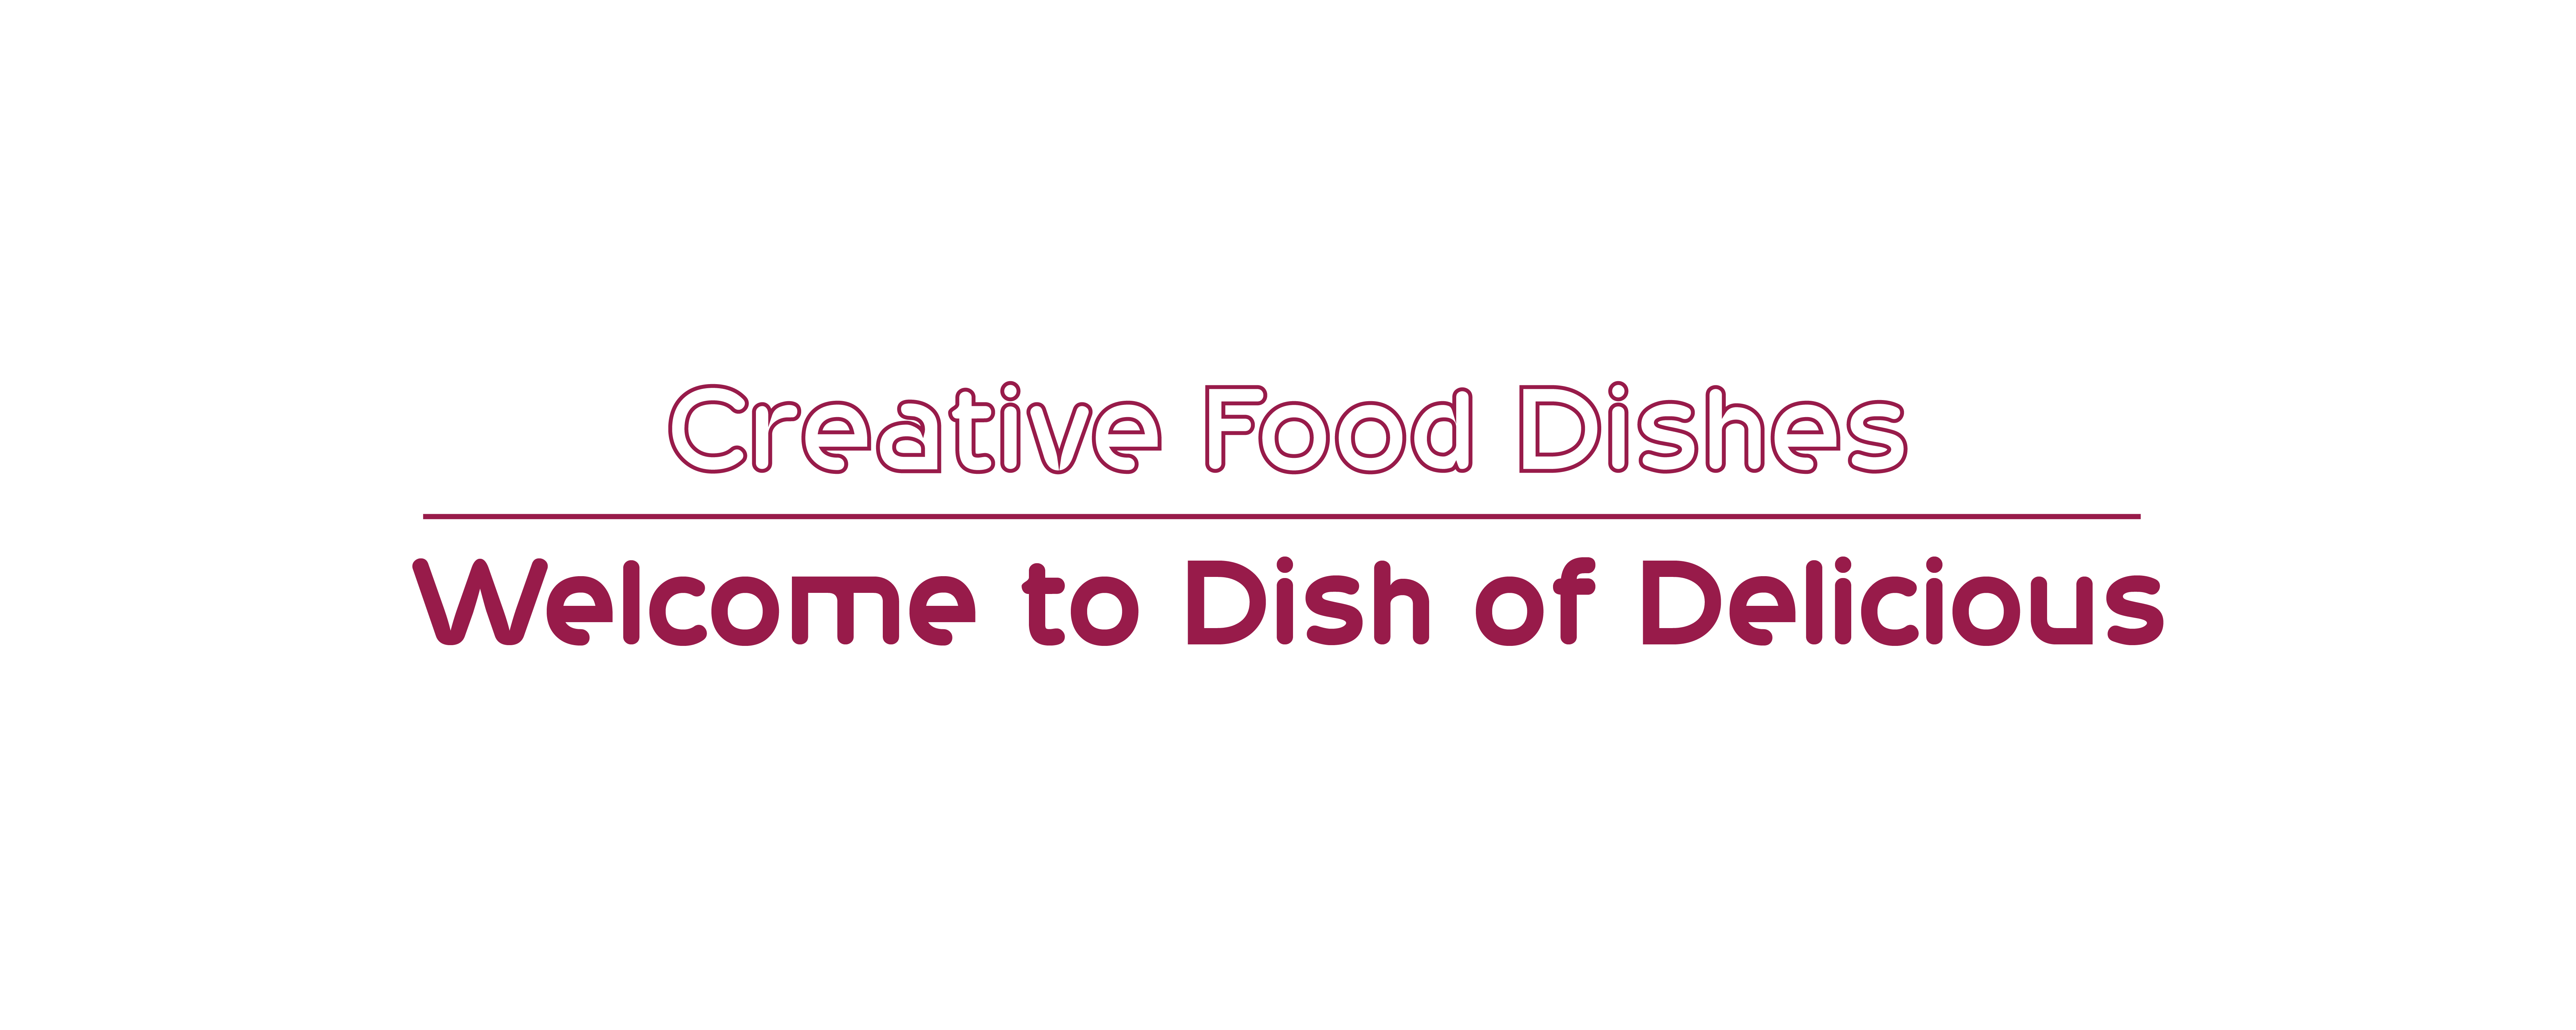 Dish of Delicious